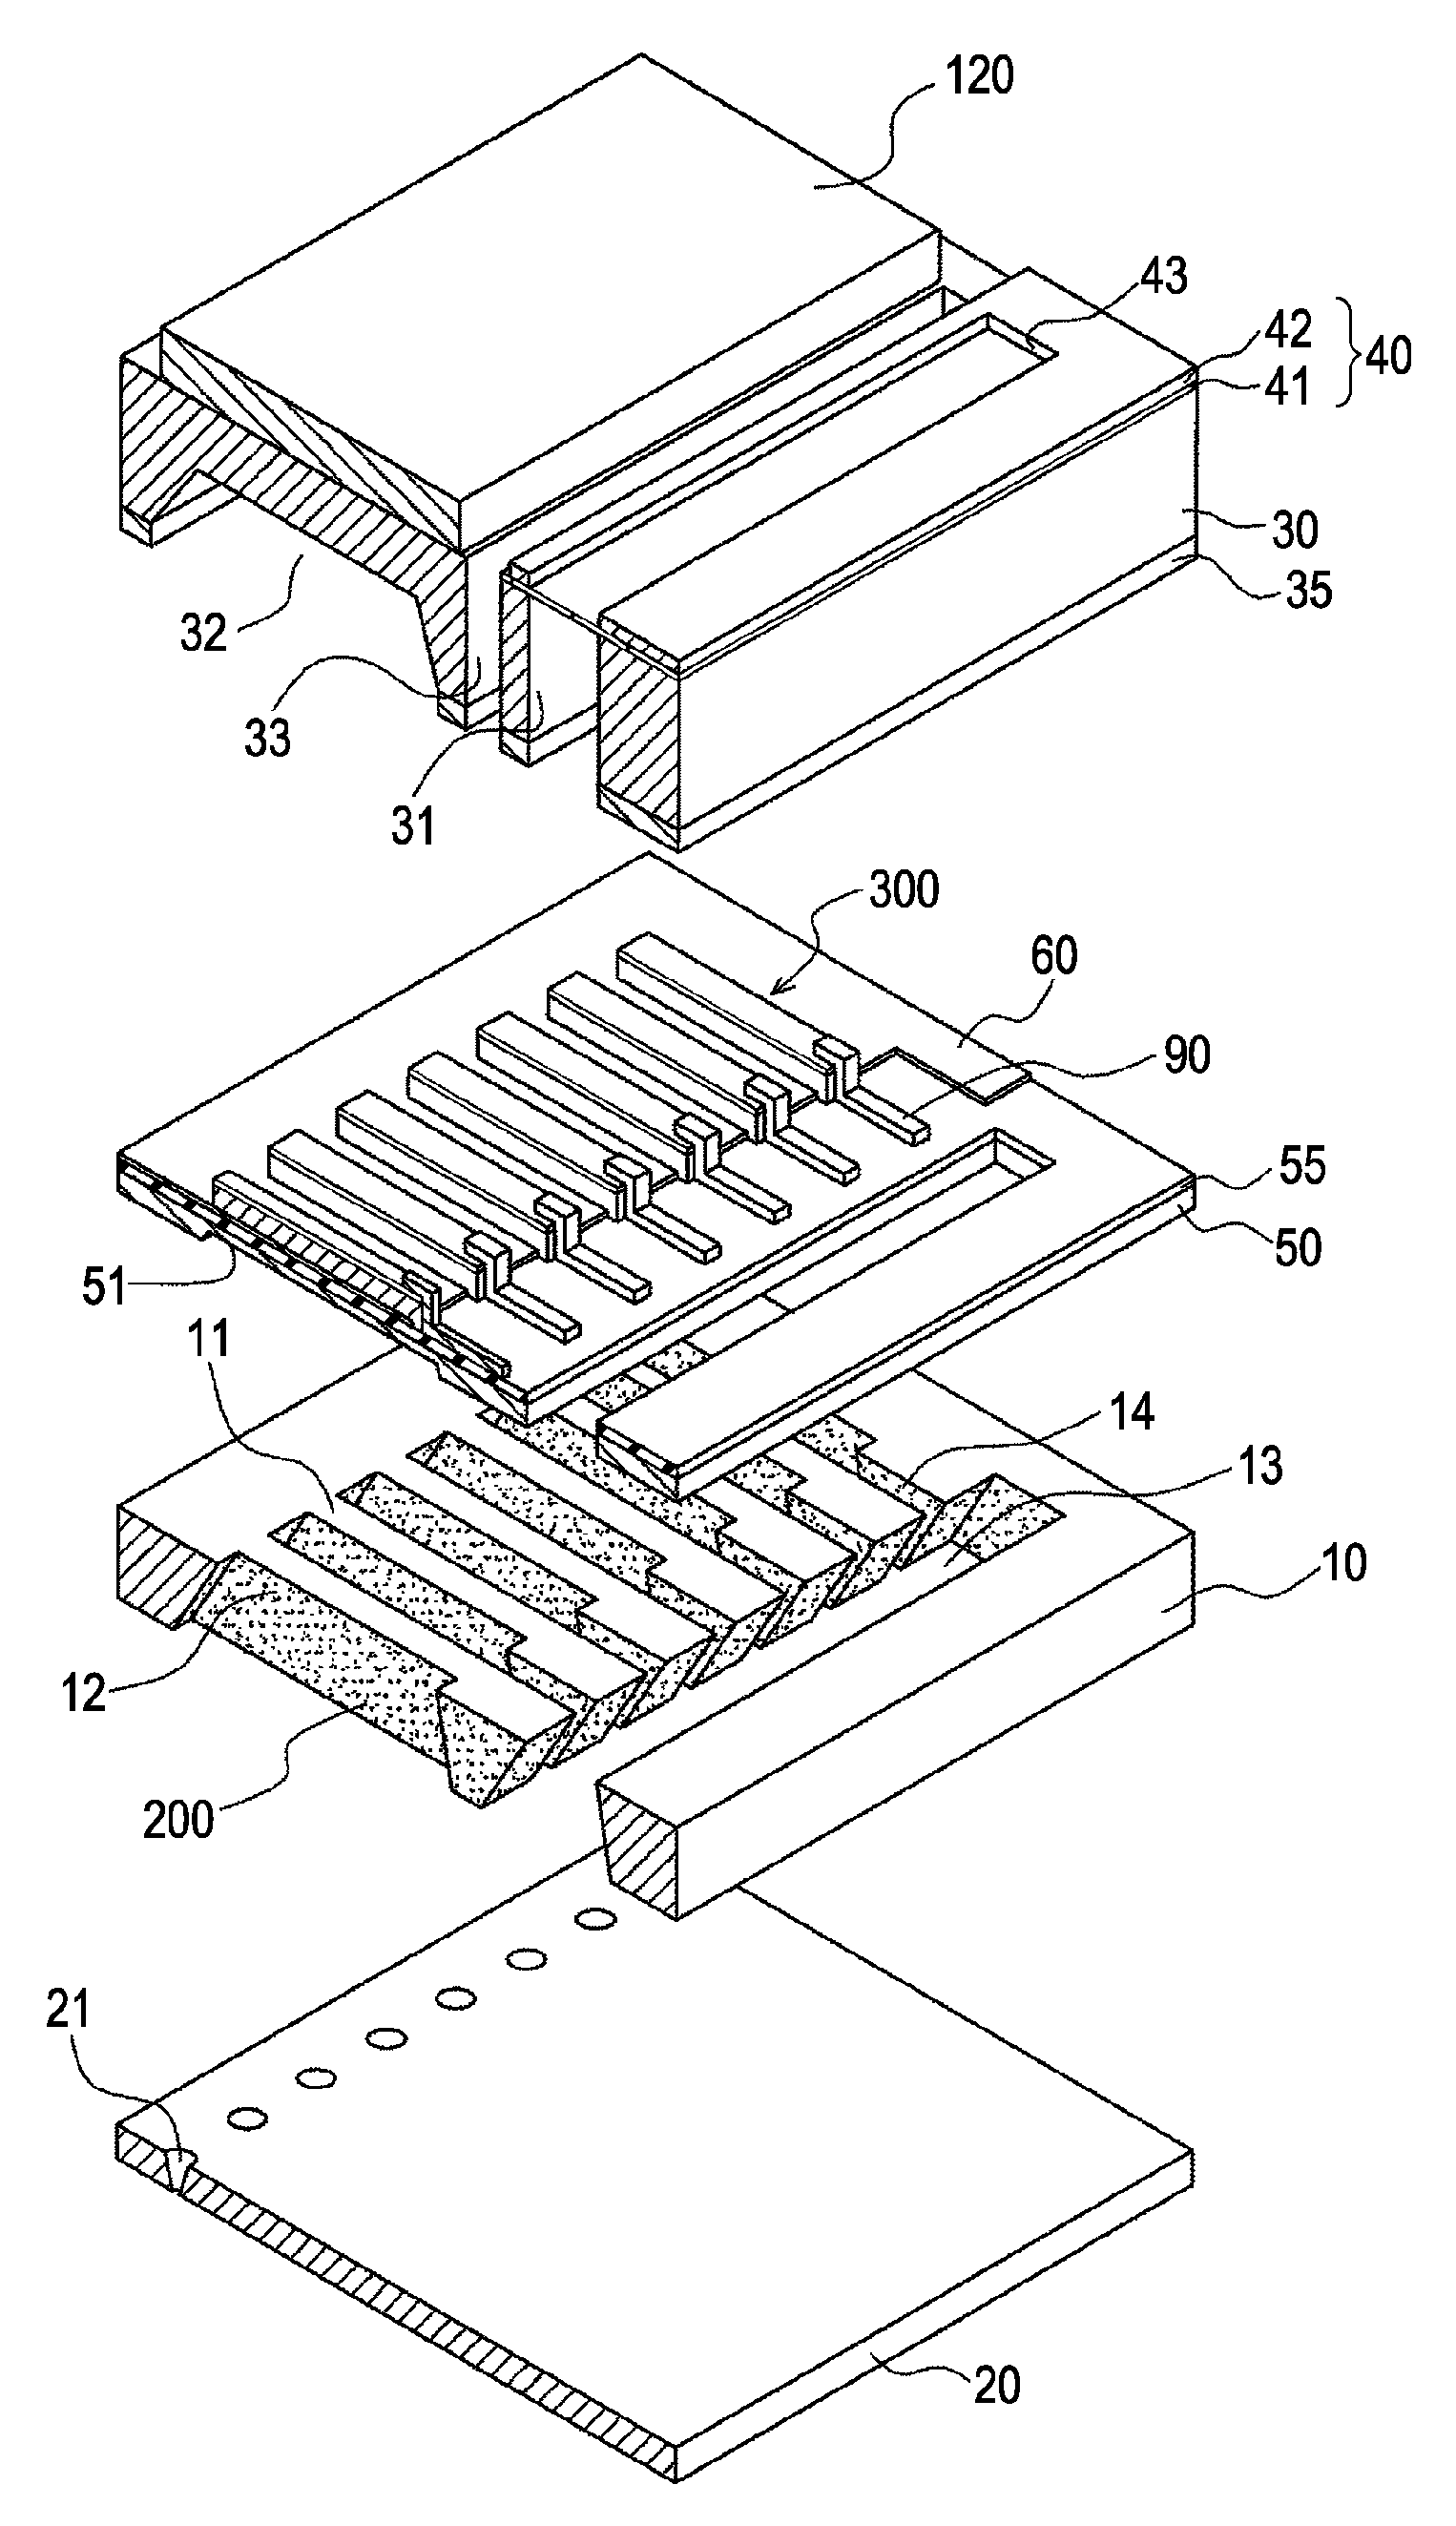 Liquid ejecting head, method of producing the same, and liquid ejecting apparatus